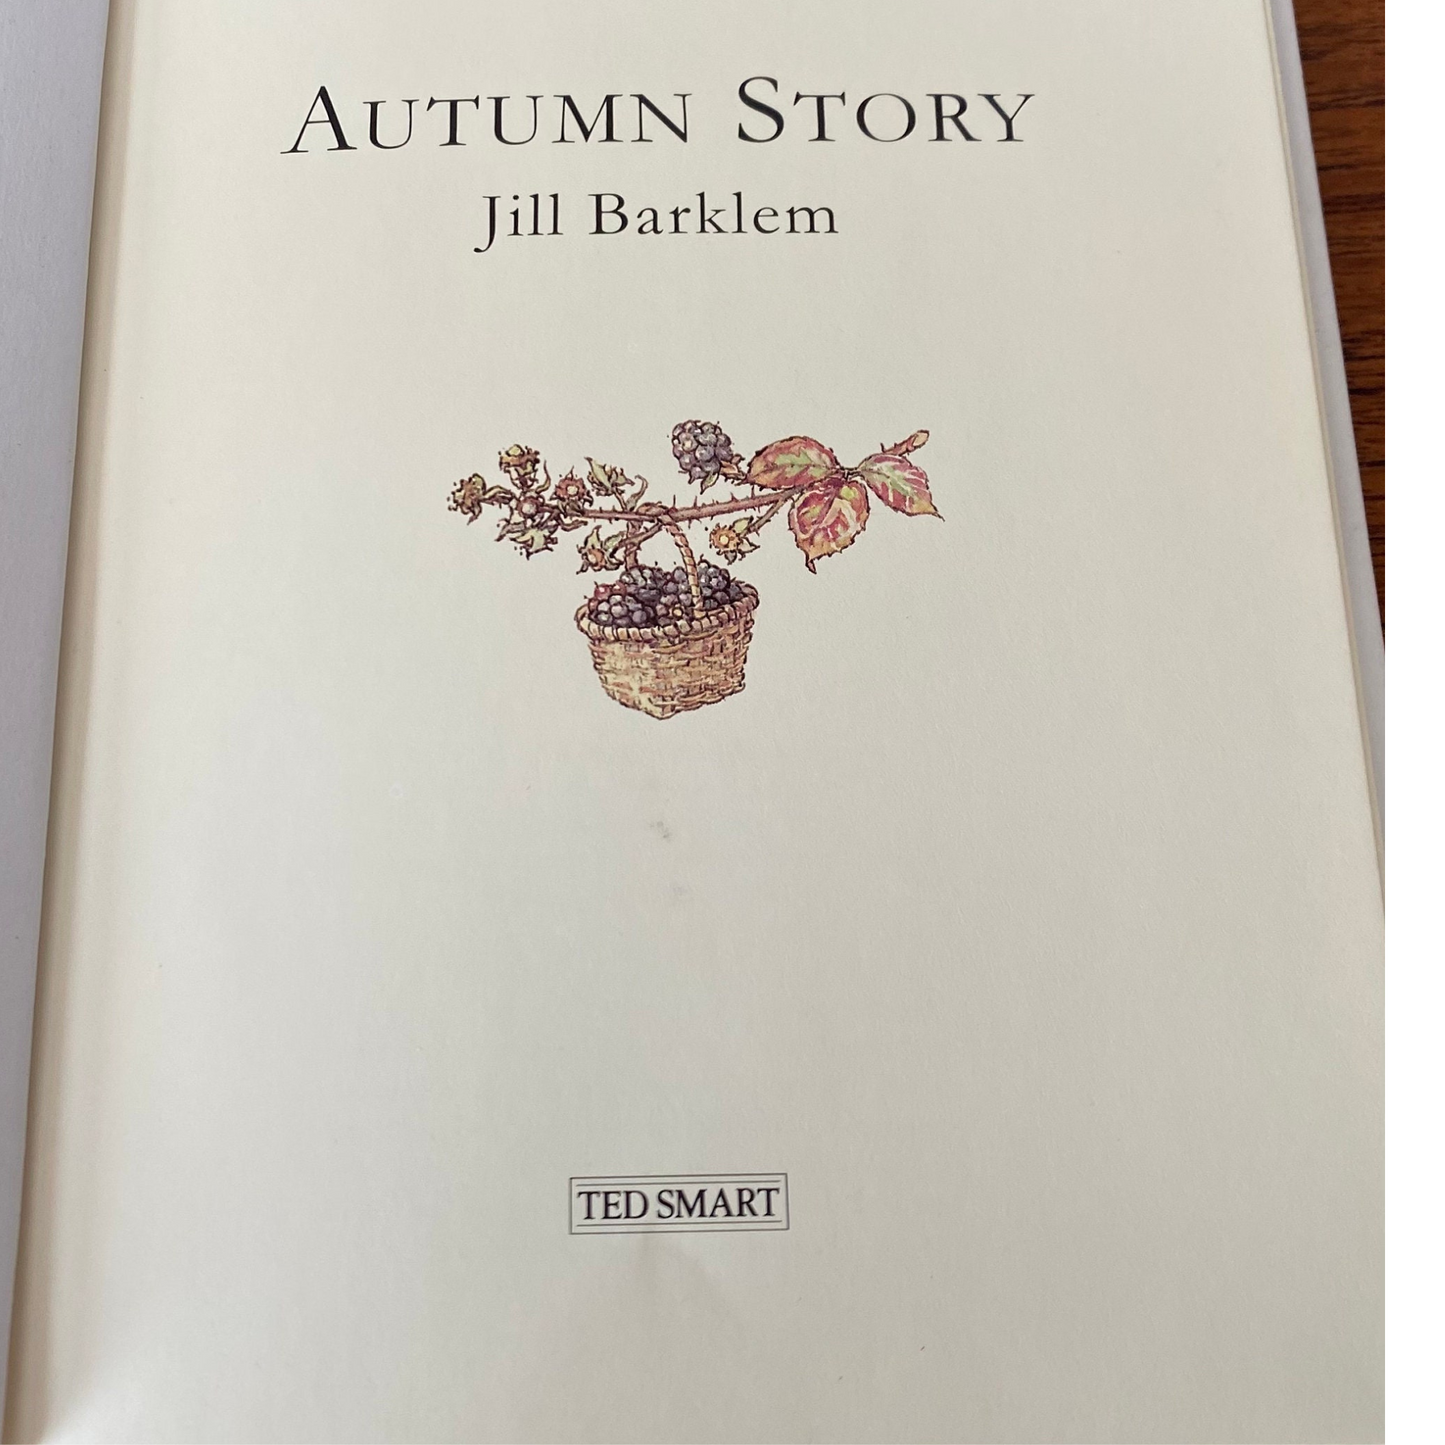 Brambly Hedge, Autumn Story  by Jill Barklem. 1995 edition. Vintage  children’s hardback picture book. Great gift idea